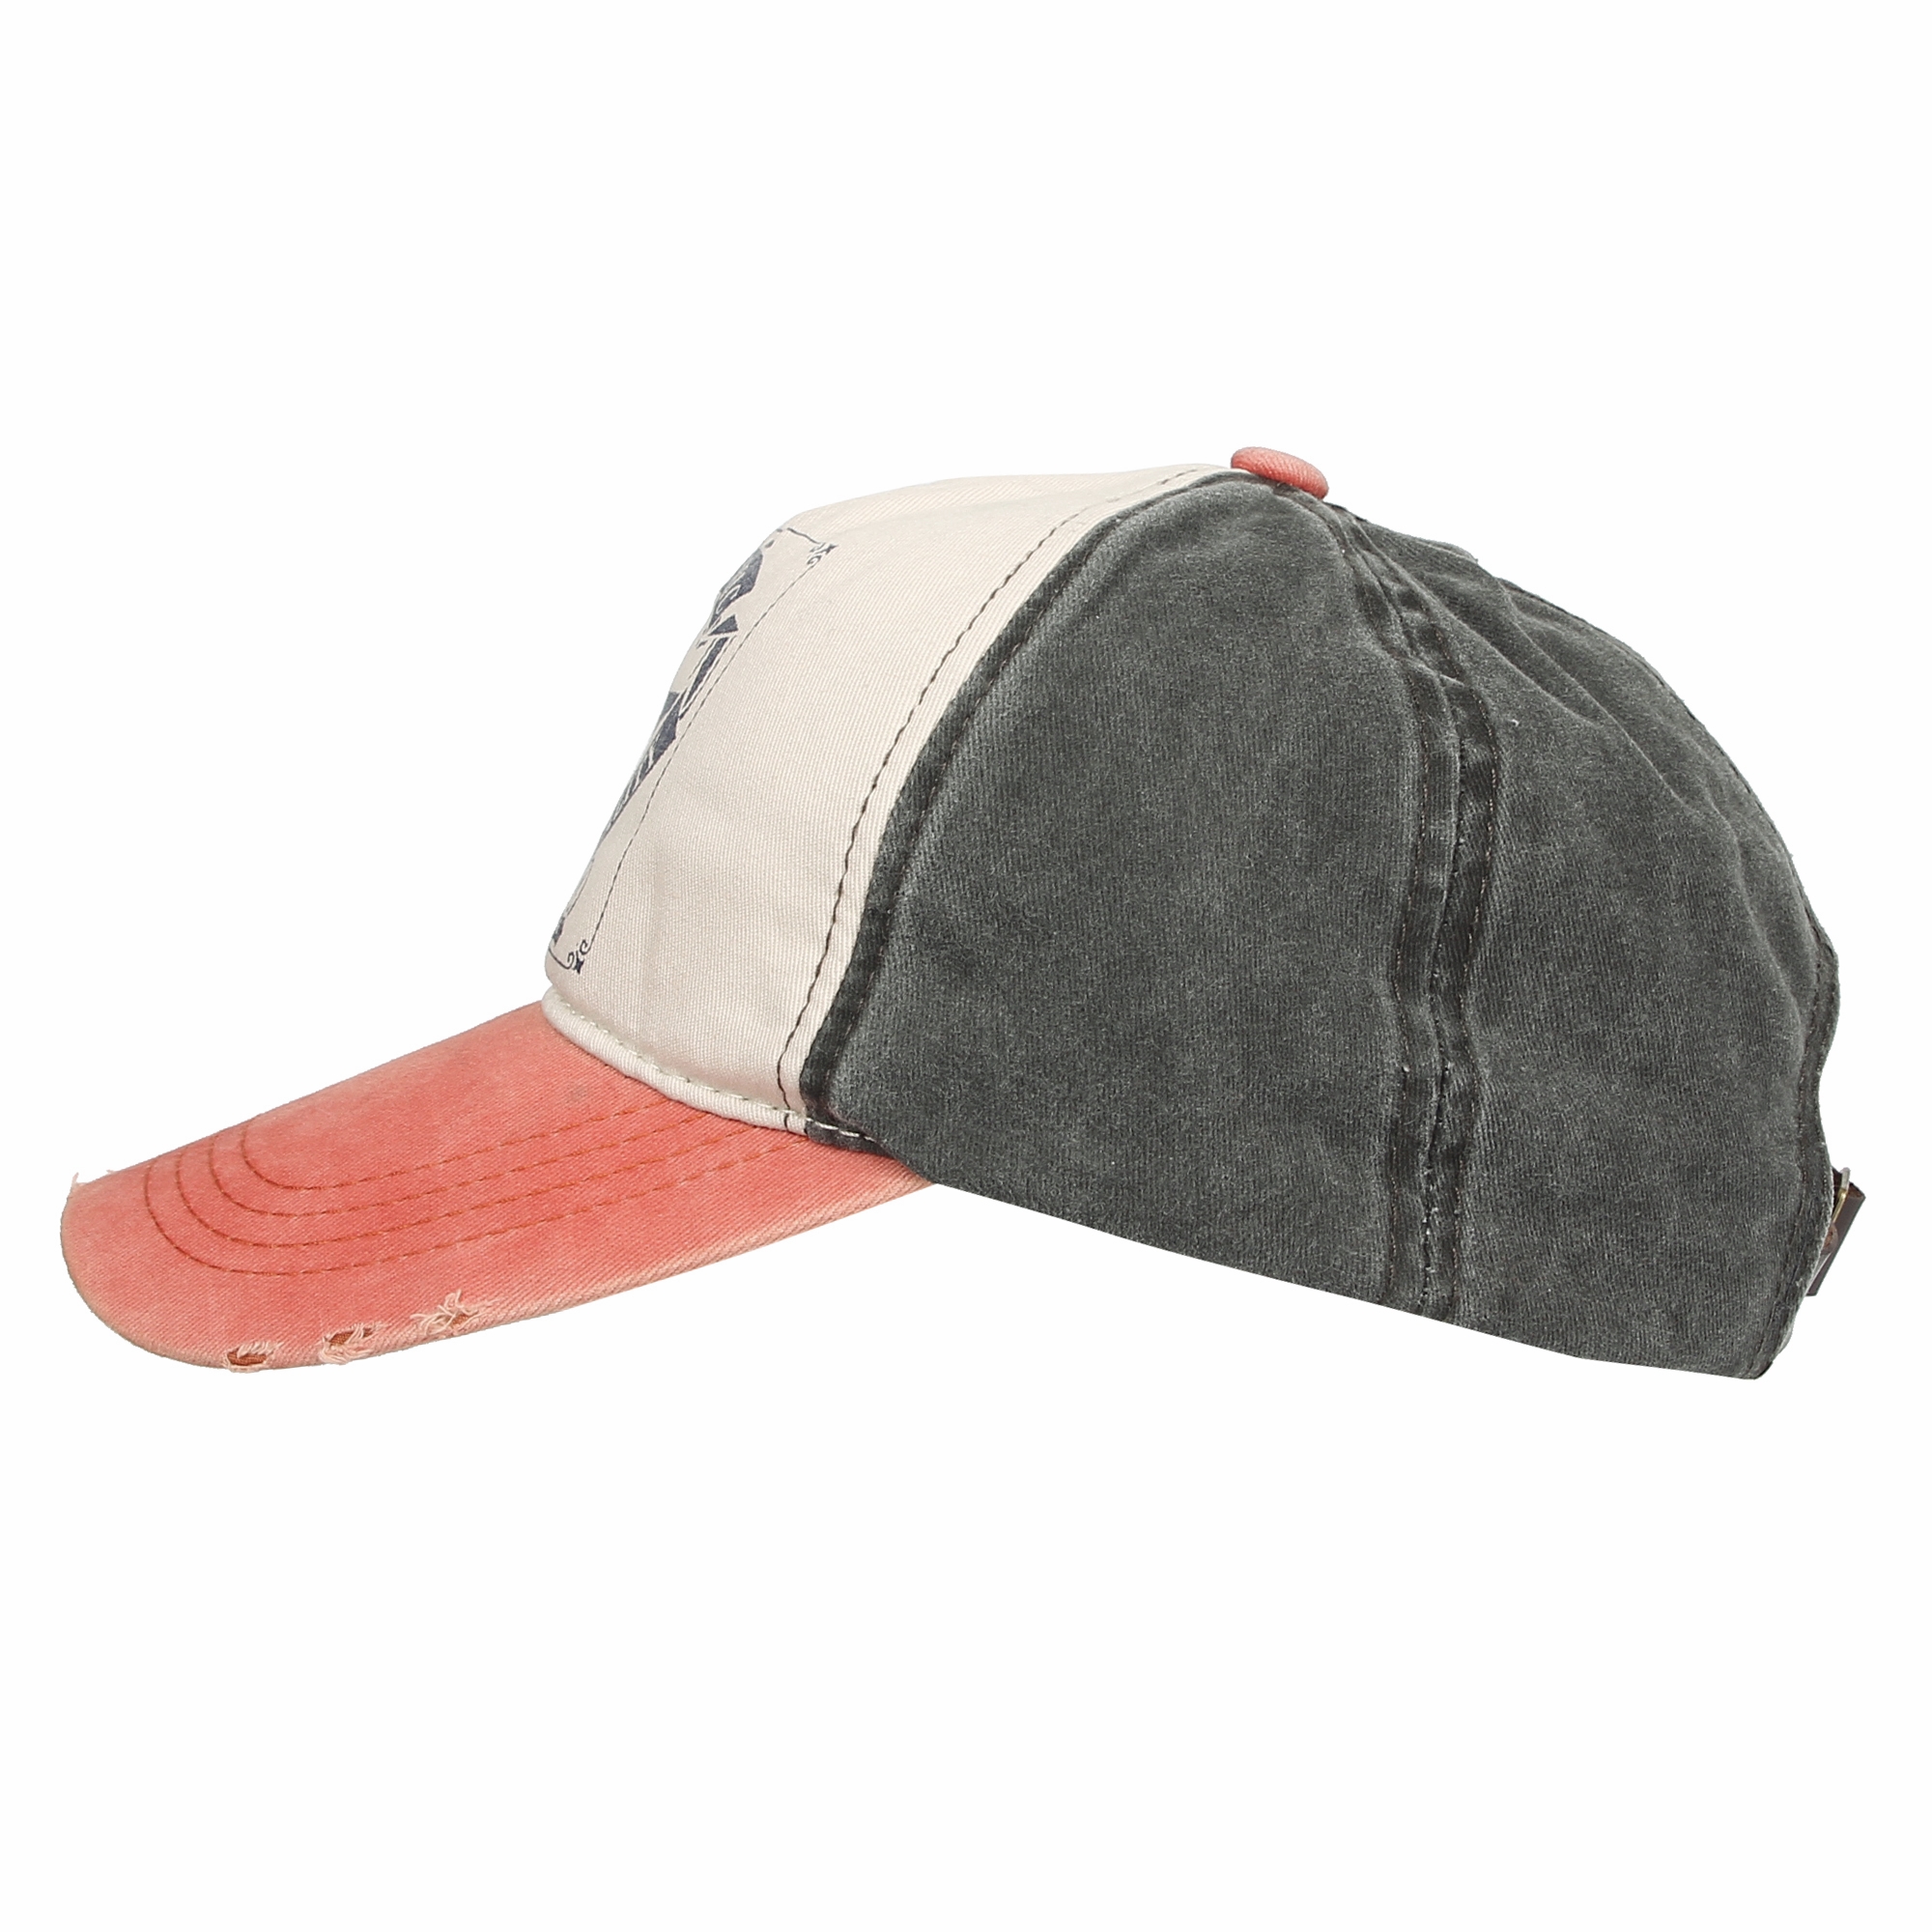 Withmoons Distressed Vintage Baseball Cap 100 Cotton Trucker Dad Hat